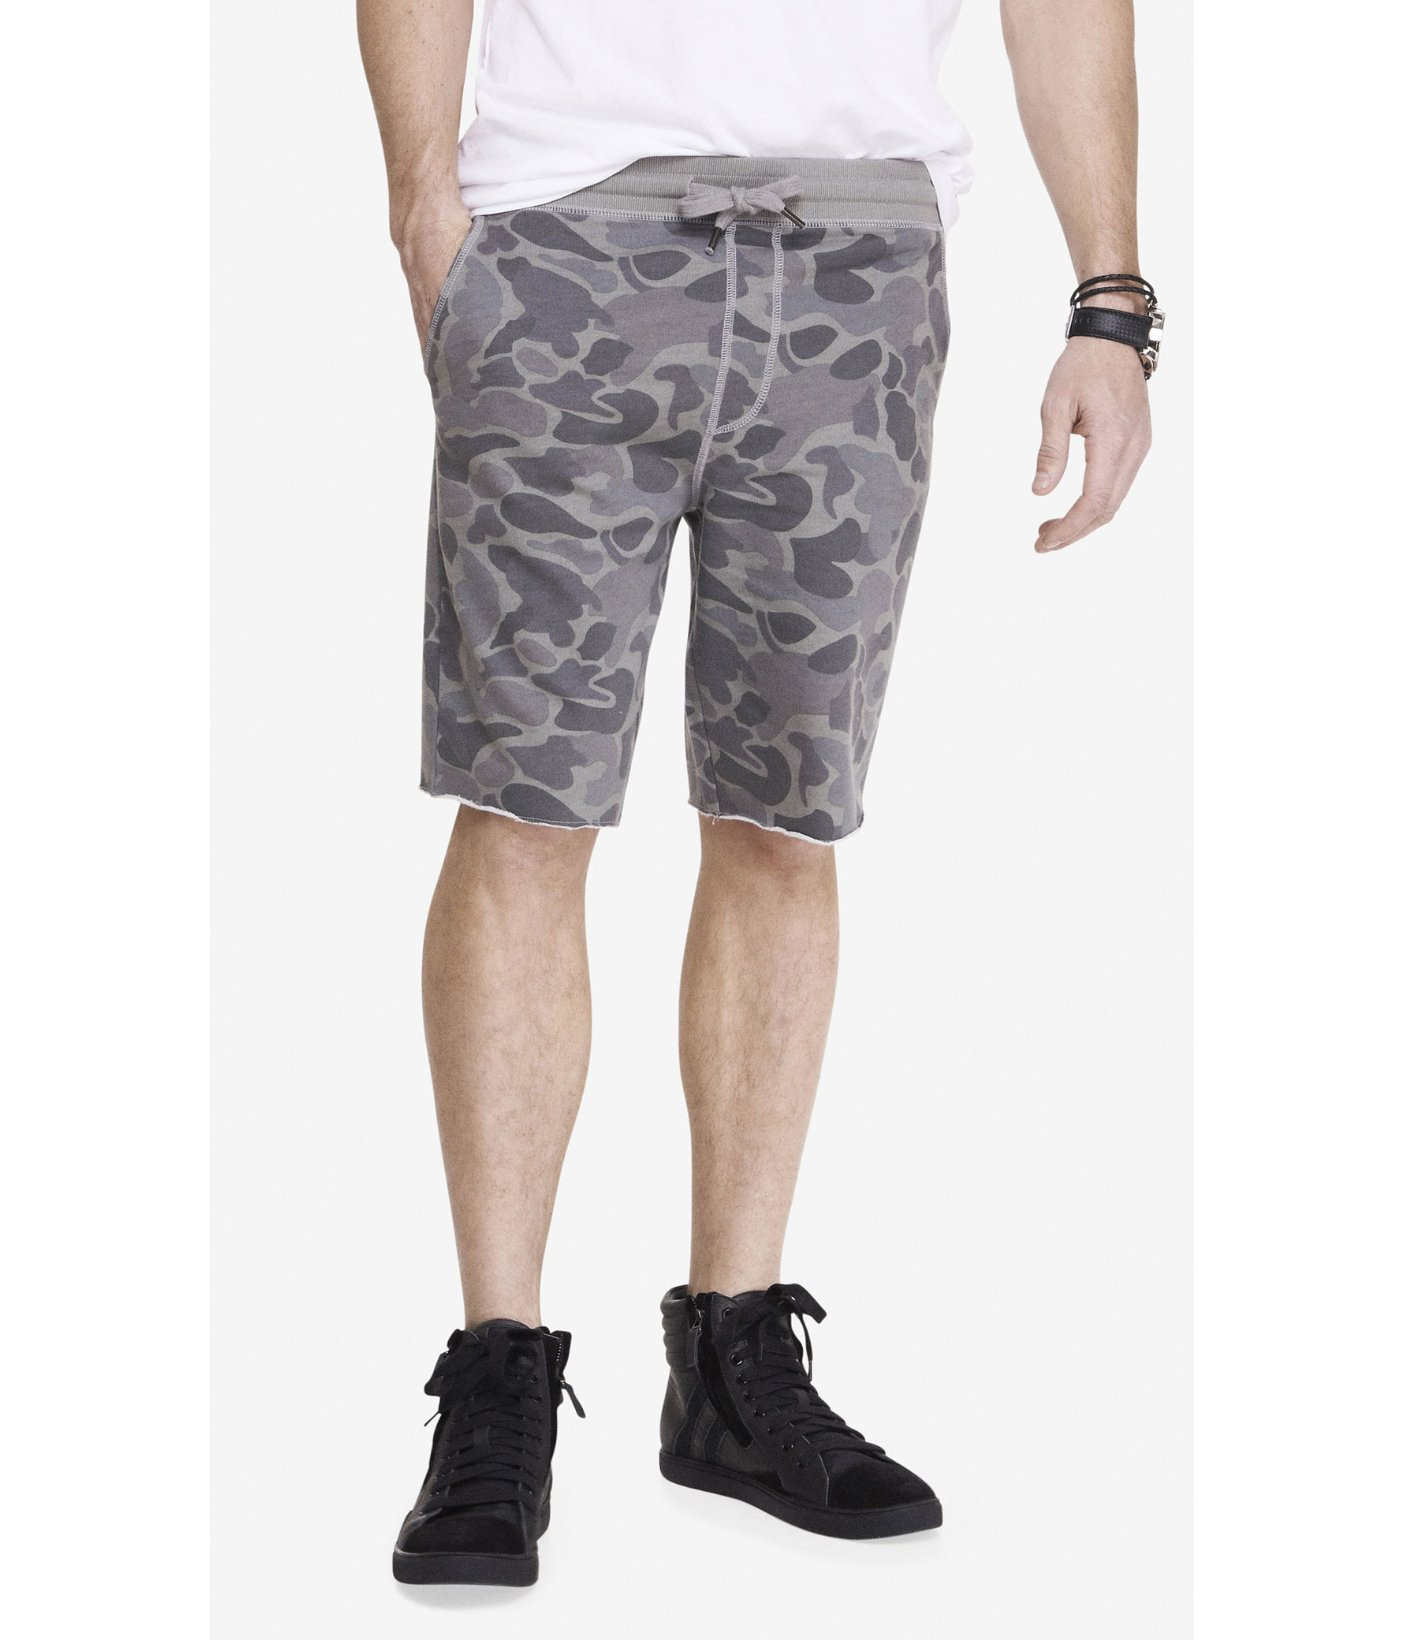 Lyst - Express Camouflage Fleece Drawstring Shorts in Green for Men